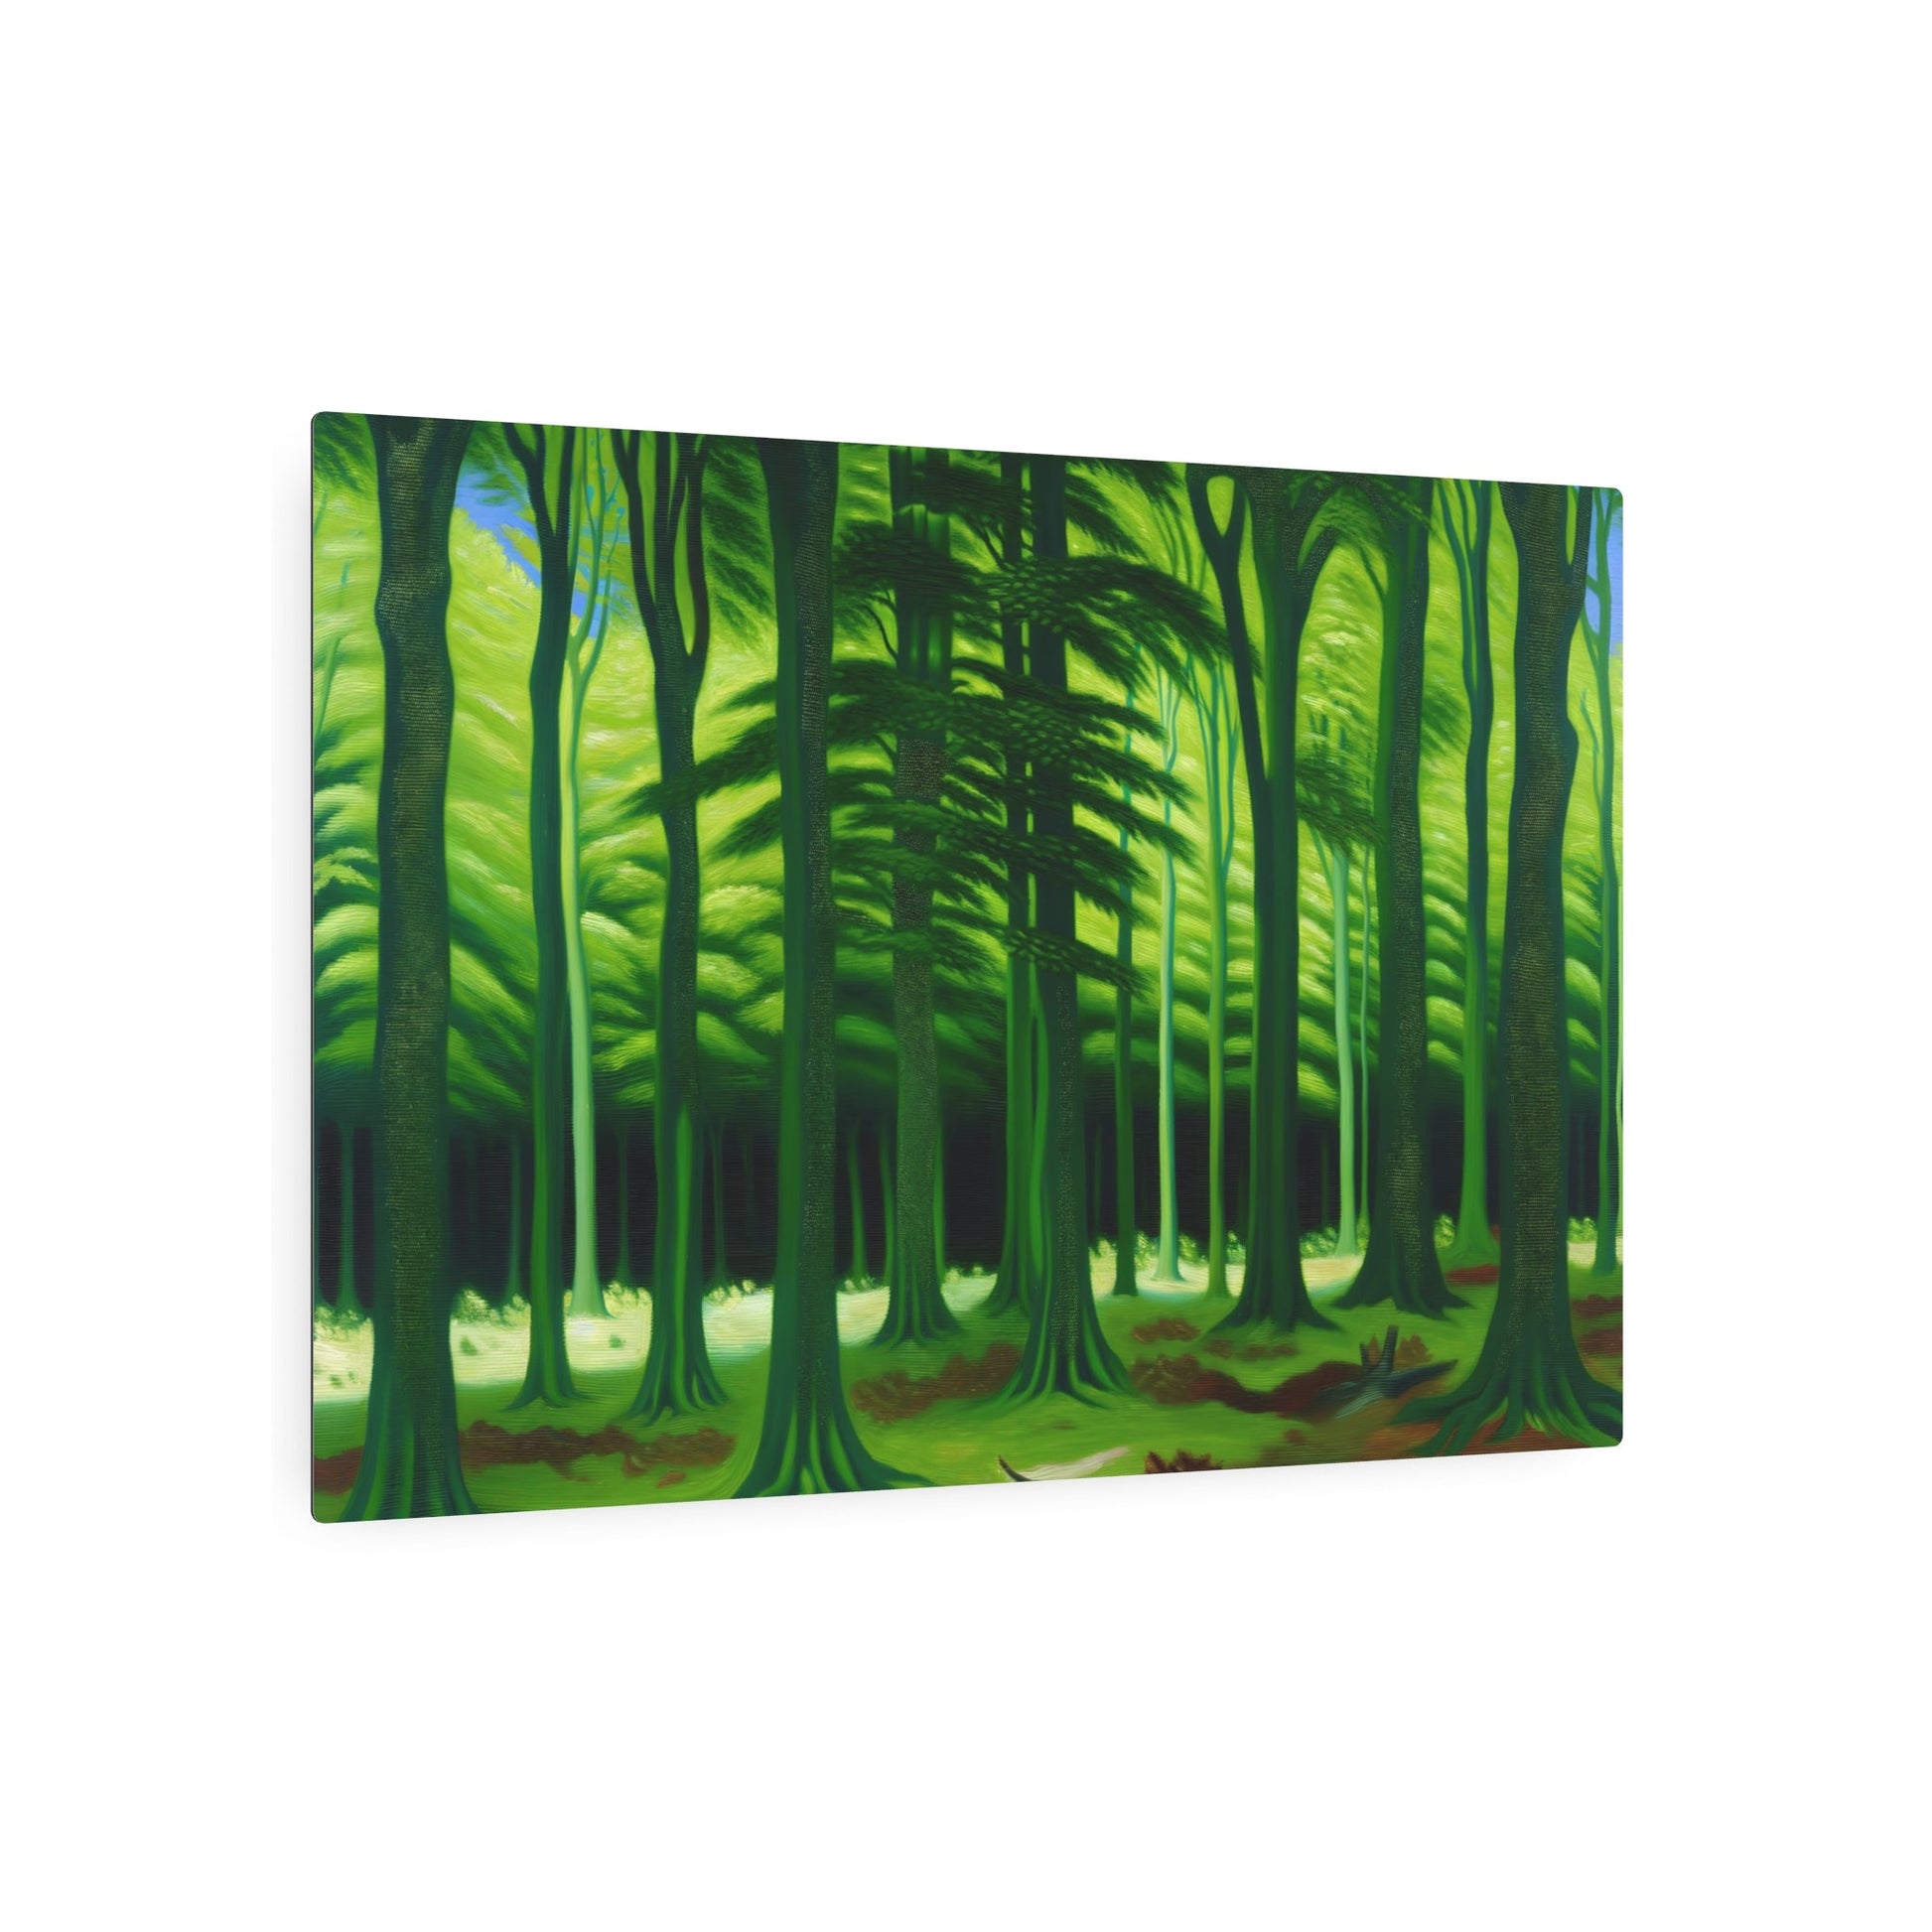 Metal Poster Art | "Neoclassicism Western Art Styles: Lush Forest with Towering Trees Painting" - Metal Poster Art 36″ x 24″ (Horizontal) 0.12''